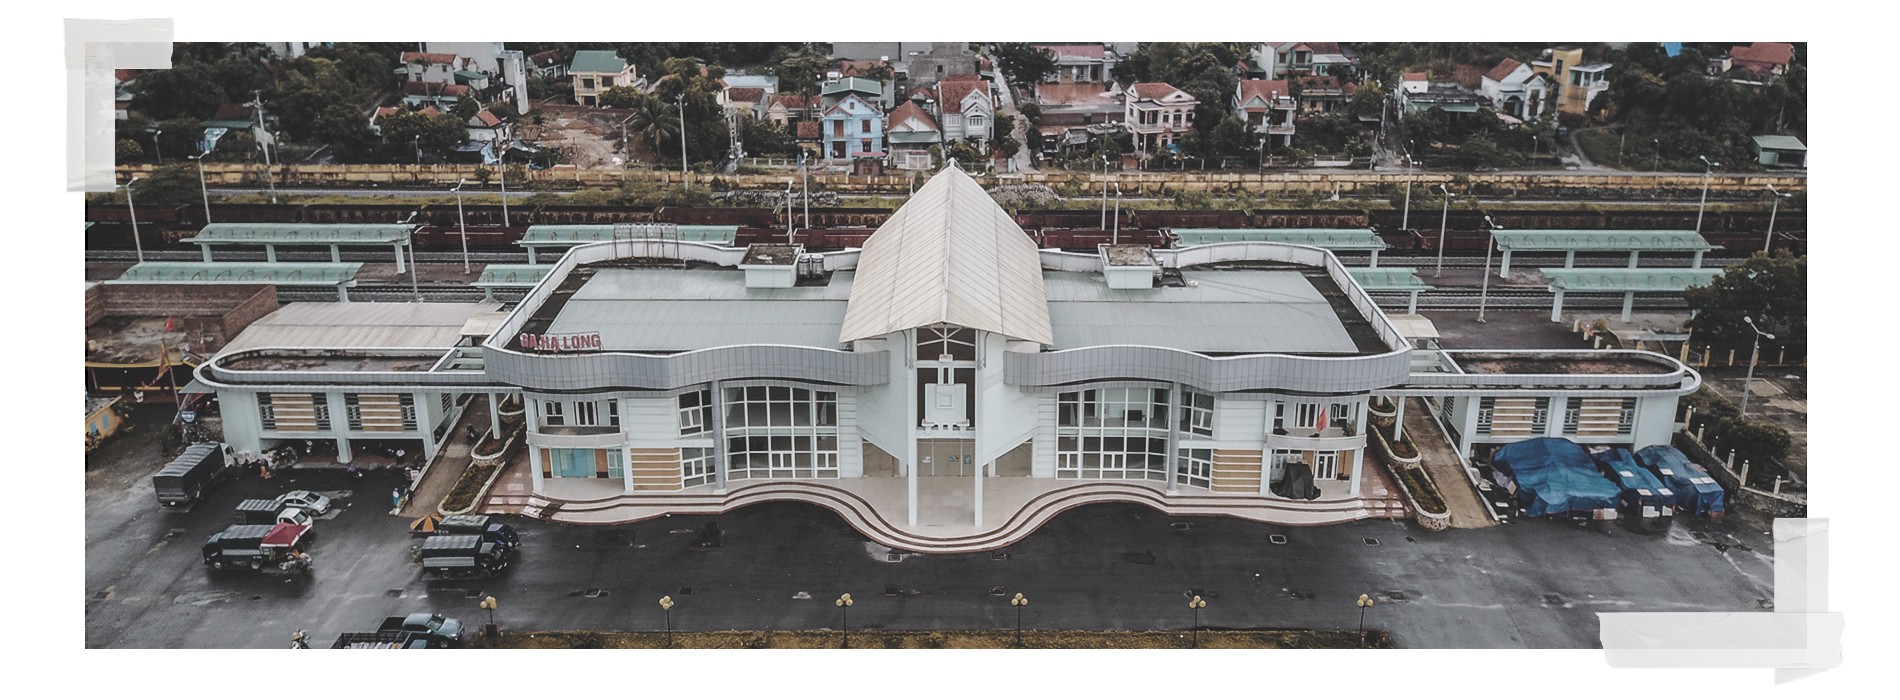 The modern Ha Long Station serving the Ha Long - Cai Lan railway route is seen in this photo. Photo: Tuoi Tre